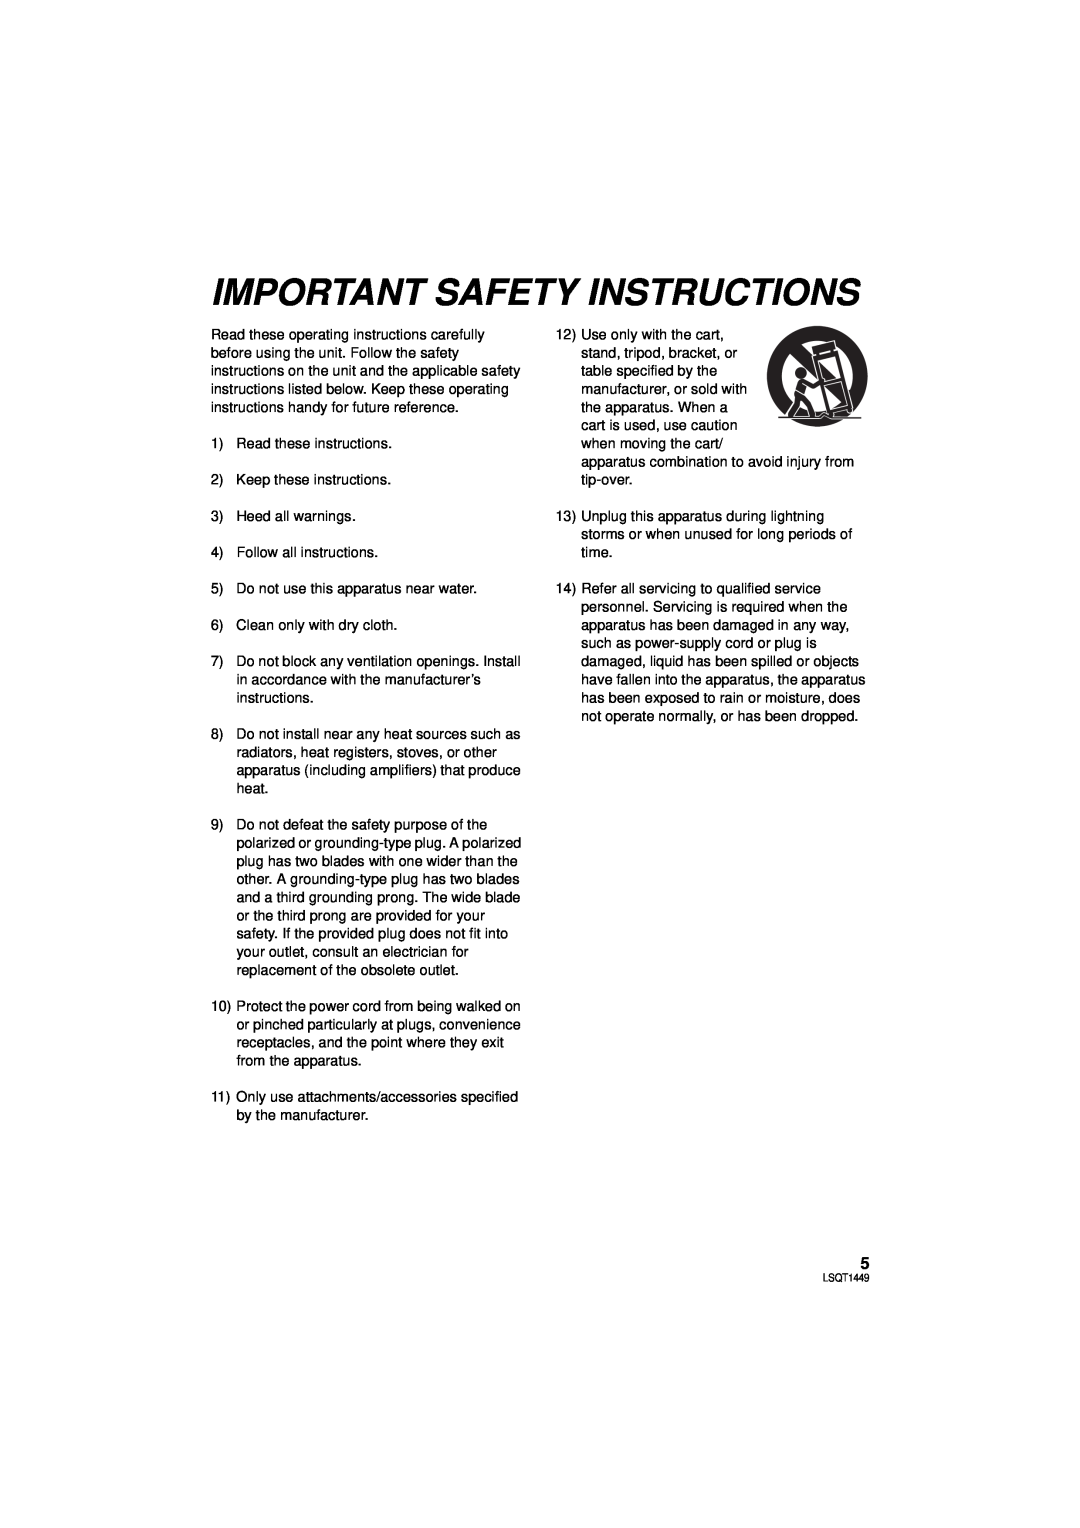 Panasonic SDR-H90PC, SDR-H80PC operating instructions Important Safety Instructions 